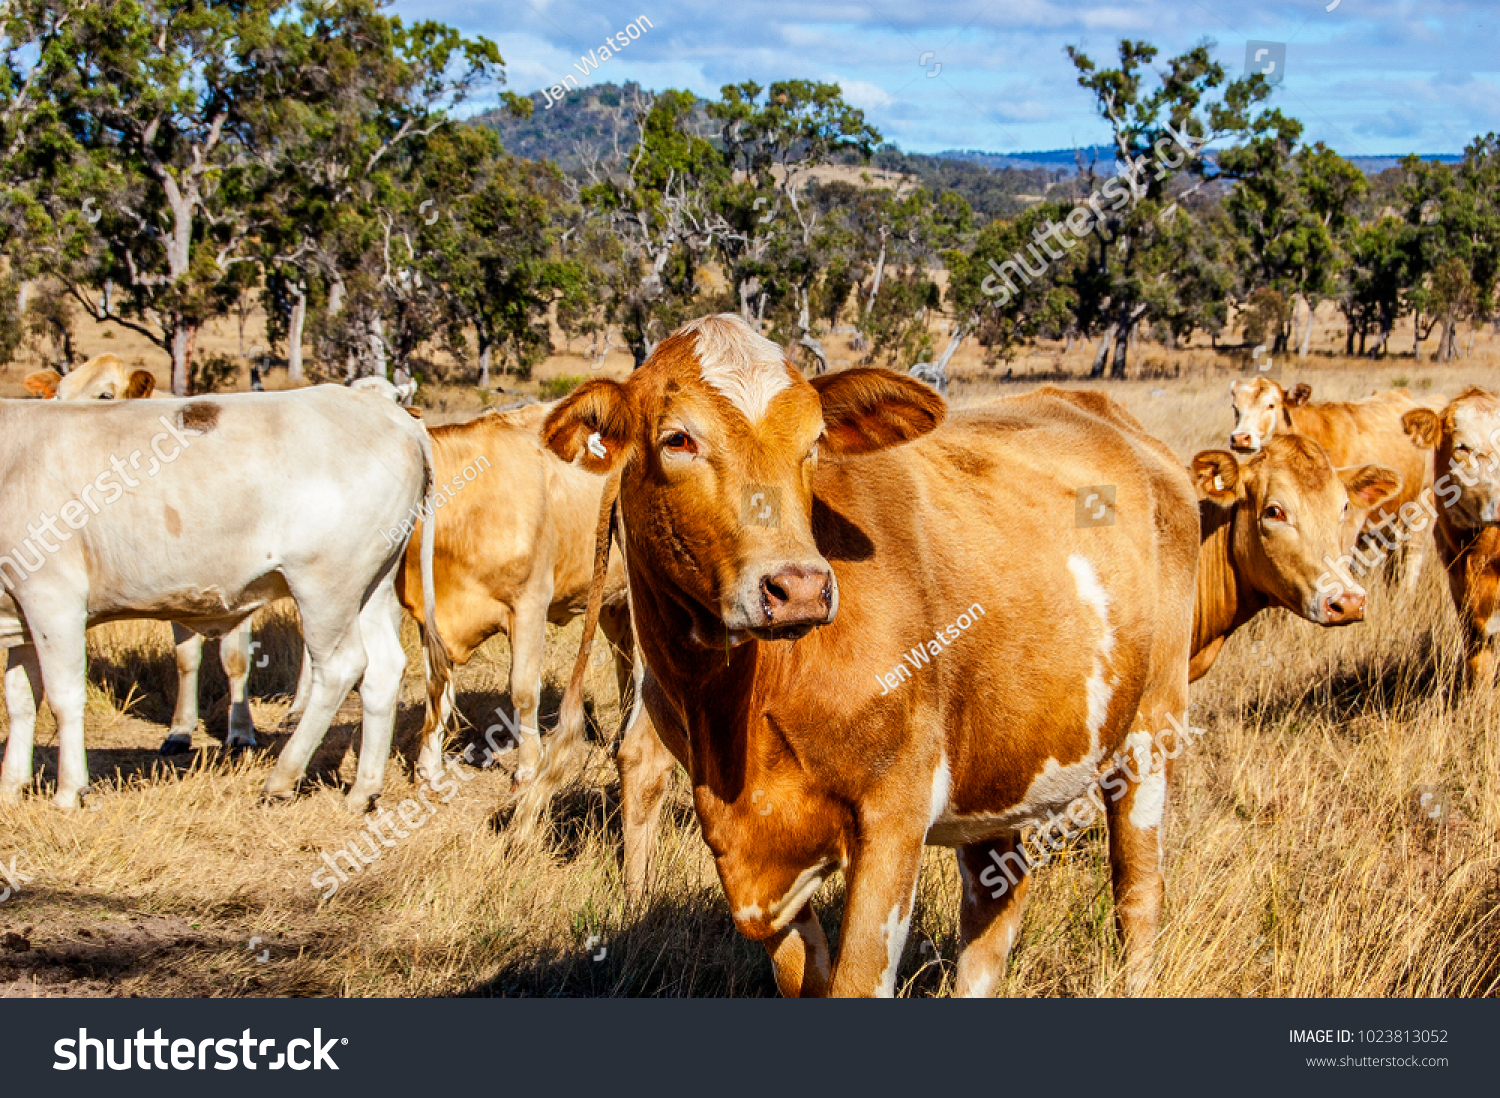 Herd of Charolais cross Brahman cattle. Charbray, a versatile beef breed, combines lean beef characteristics and docile temperament of the Charolais with hardiness and tick resistance of the Brahman. #1023813052